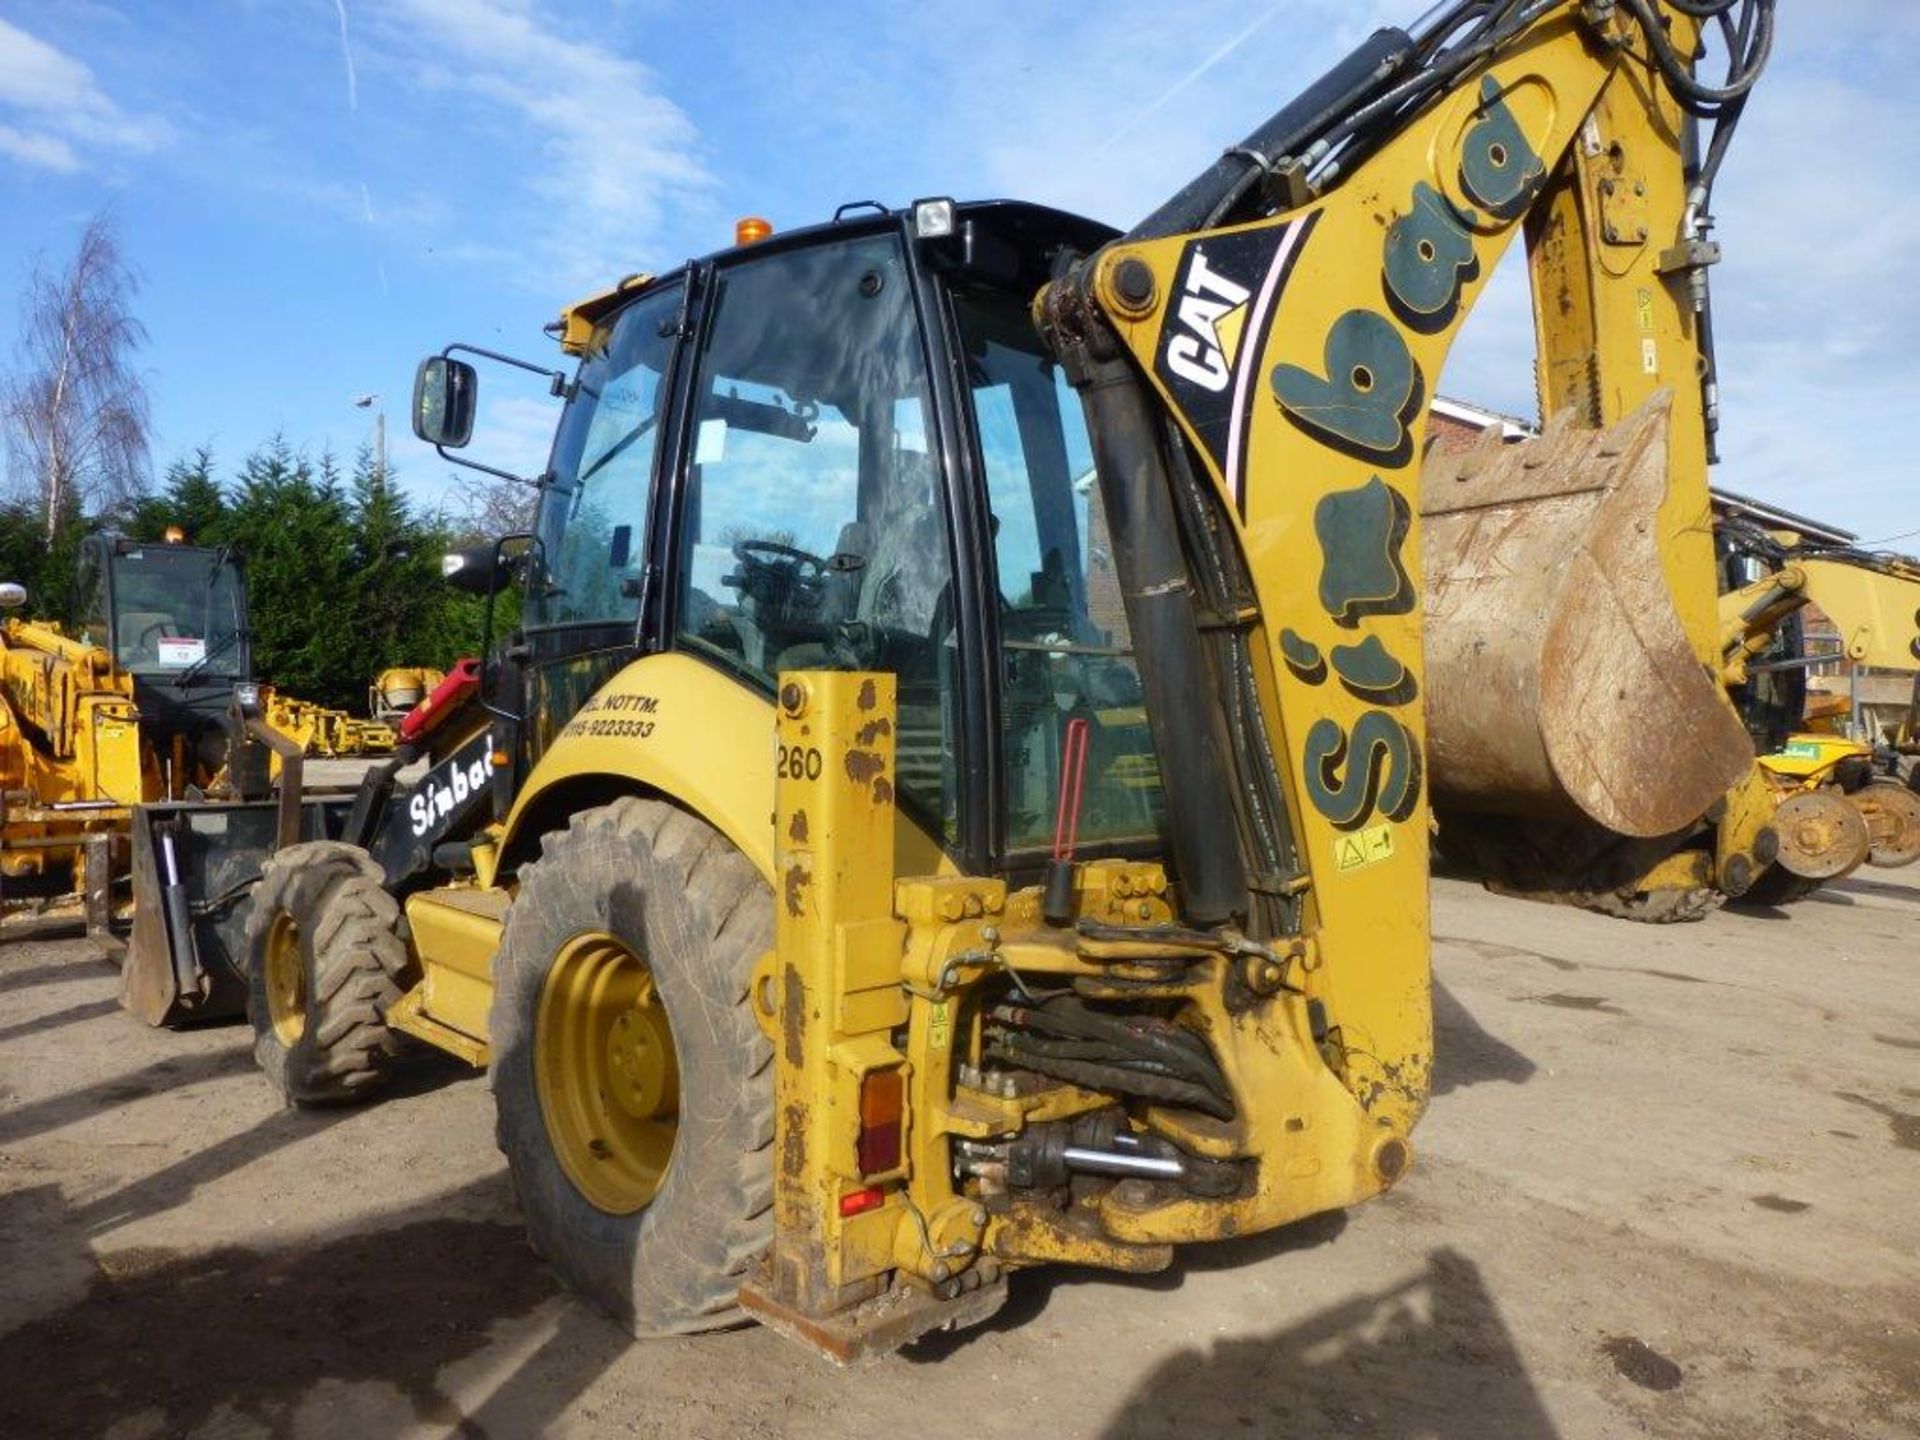 Caterpillar 428E 4x4 backhoe loader (2007), indicated hours 4478.5, PIN no. CAT0428ECSNL01070, - Image 4 of 7